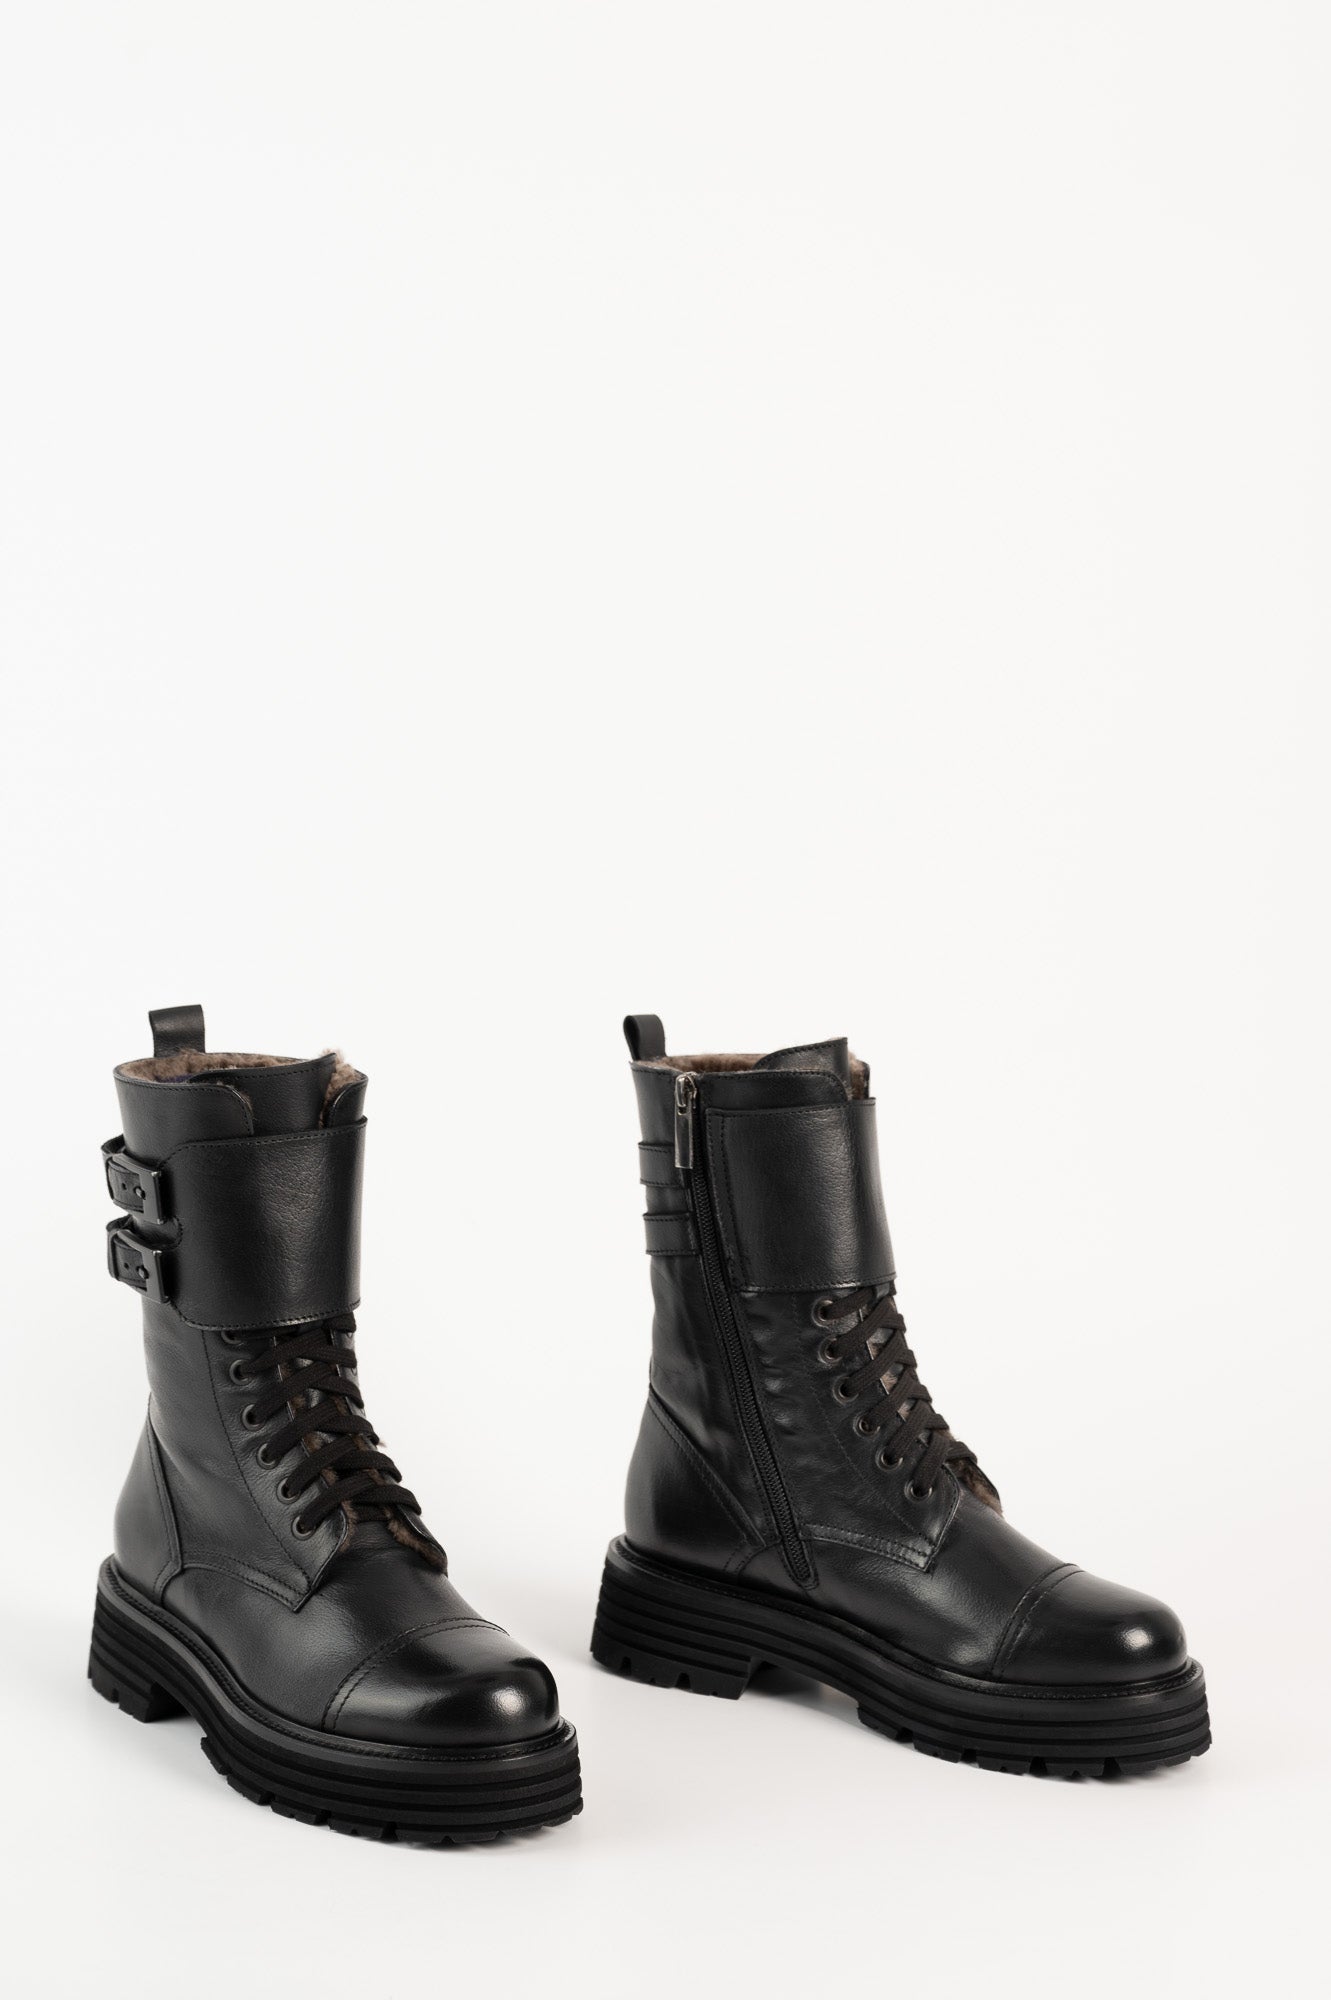 Warm Lined Boot Gilda 441 | Black Leather